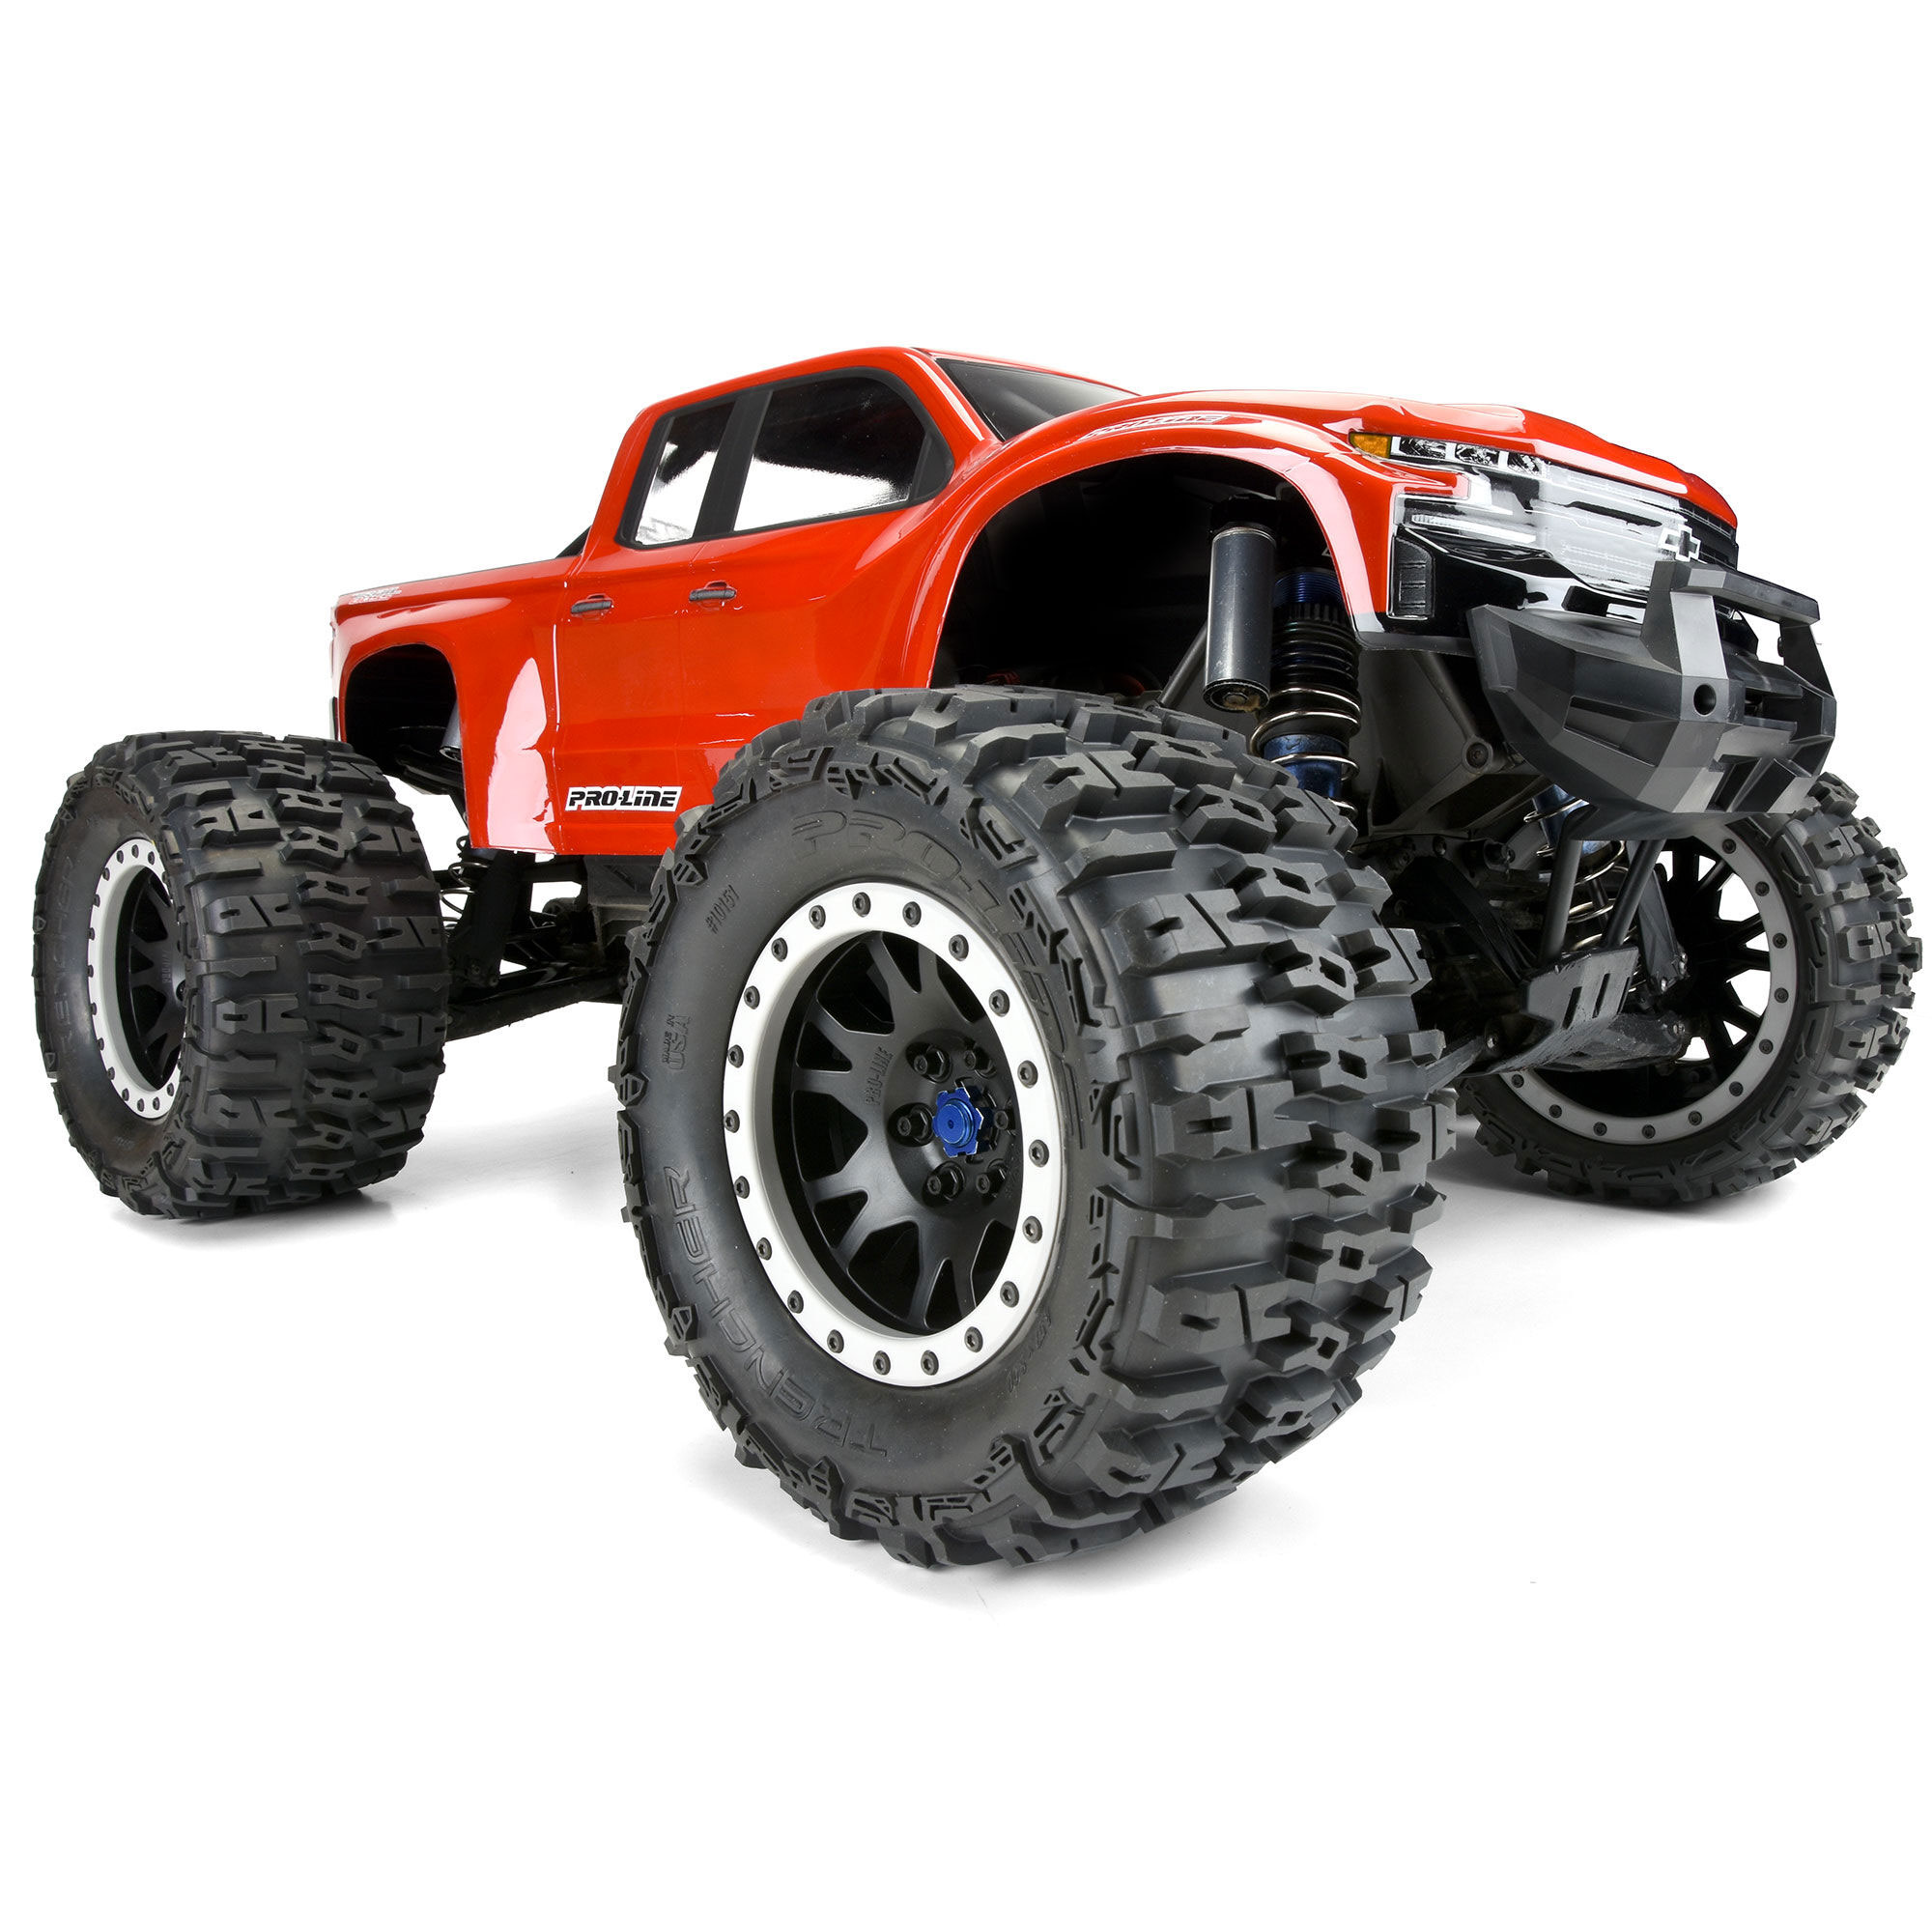 Top 5 Pro-Line Accessories for the Traxxas X-Maxx - RC Driver